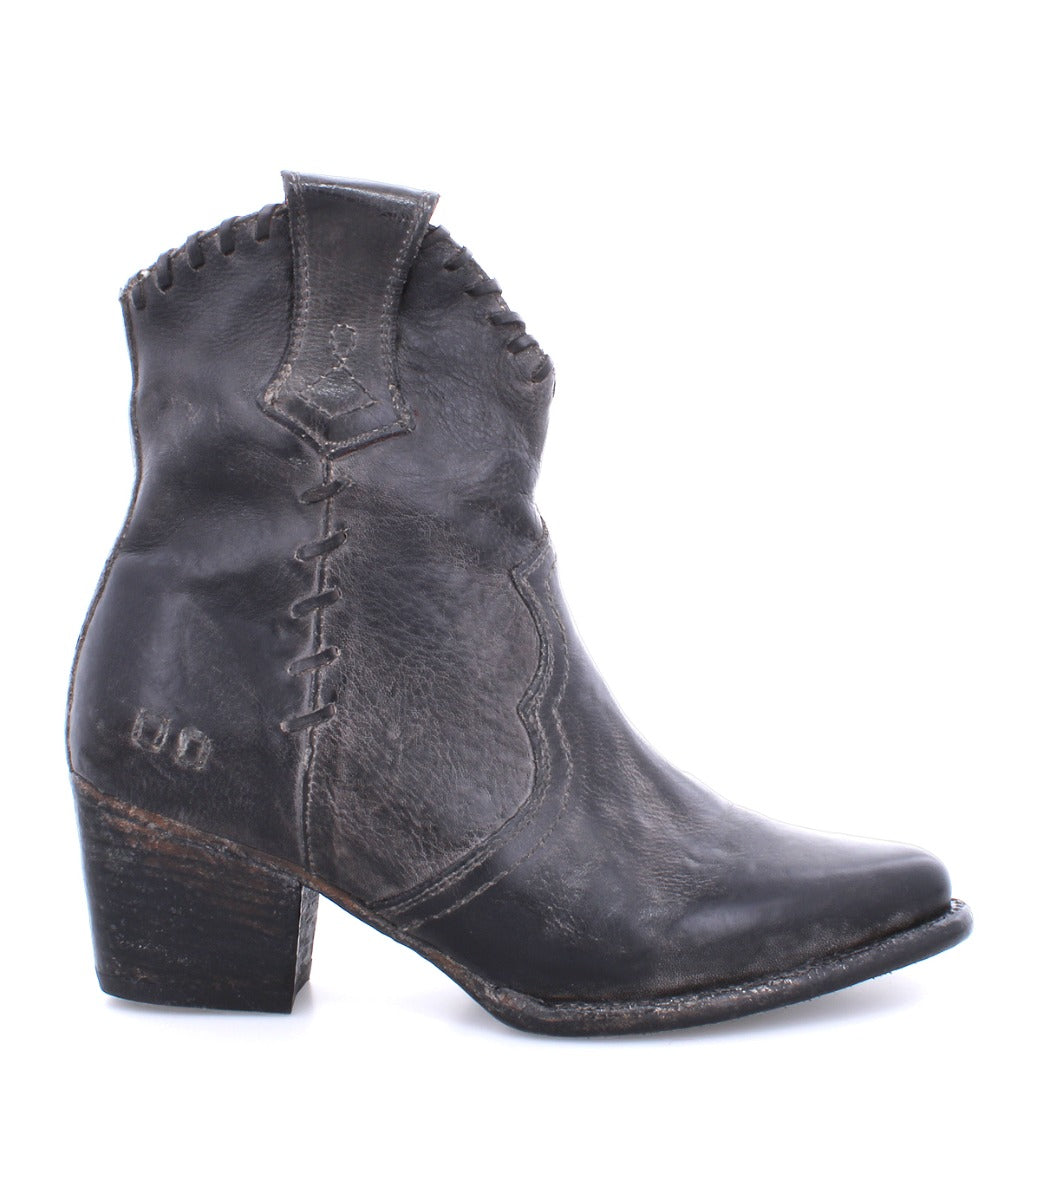 A women's black leather ankle boot, the Baila II by Bed Stu.